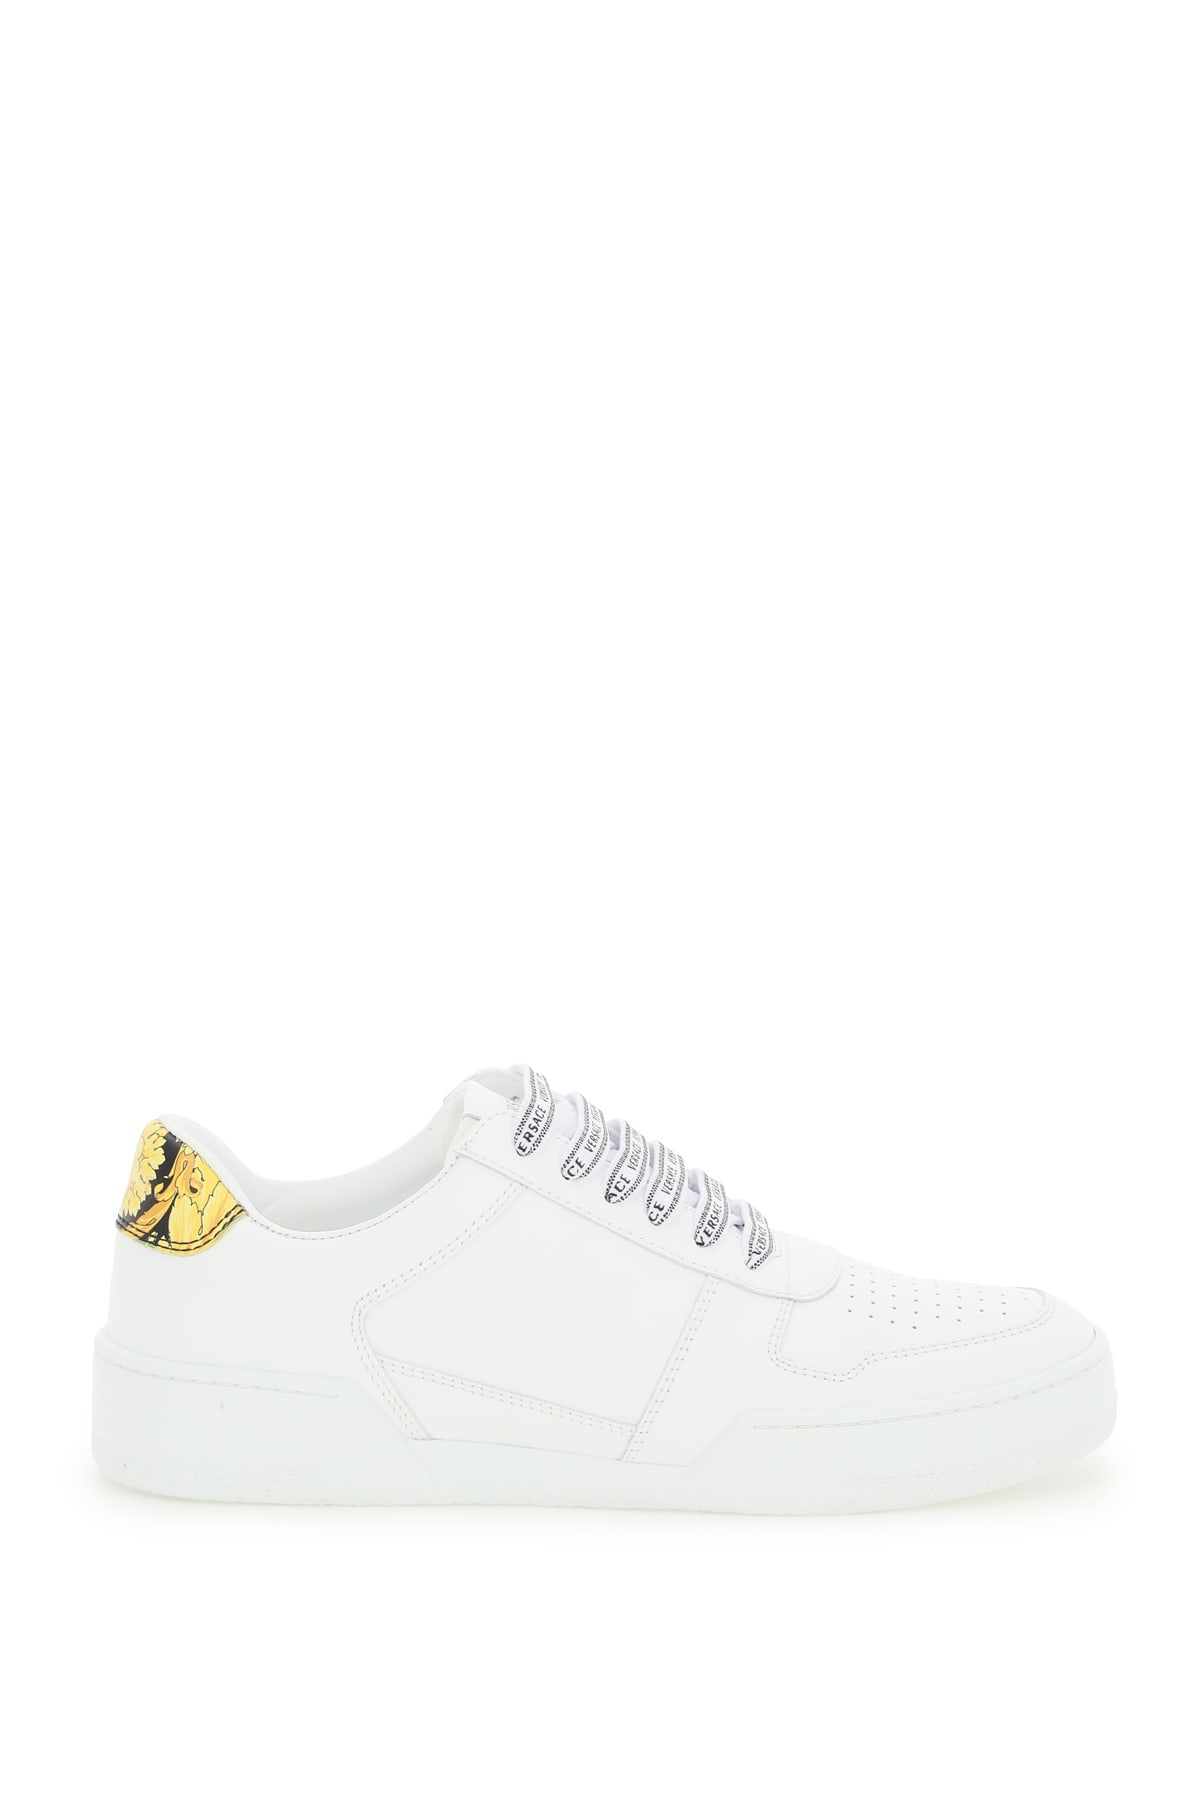 Buy Versace Ilus Sneakers online, shop Versace shoes with free shipping